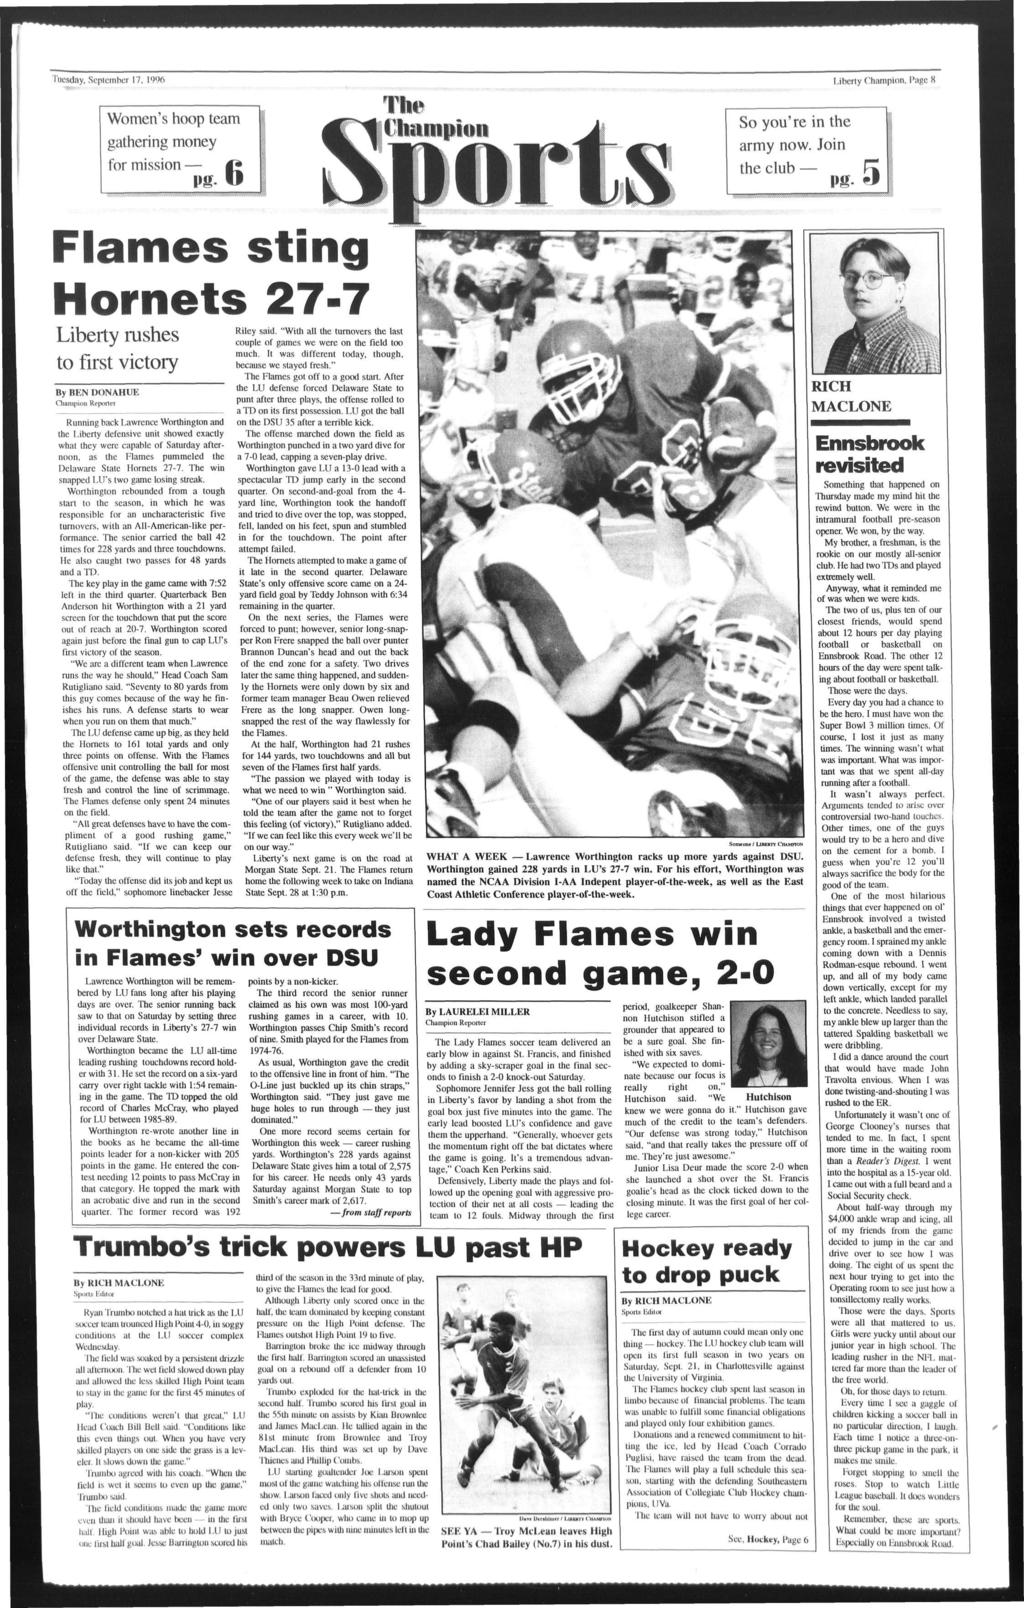 Tuesday, September 17, 1996 Lberty Champon, Page 8 Women's hoop team garng money for msson flj So you're n army now. Jon club Pt Flames stng Hornets 27-7 Rley sad.